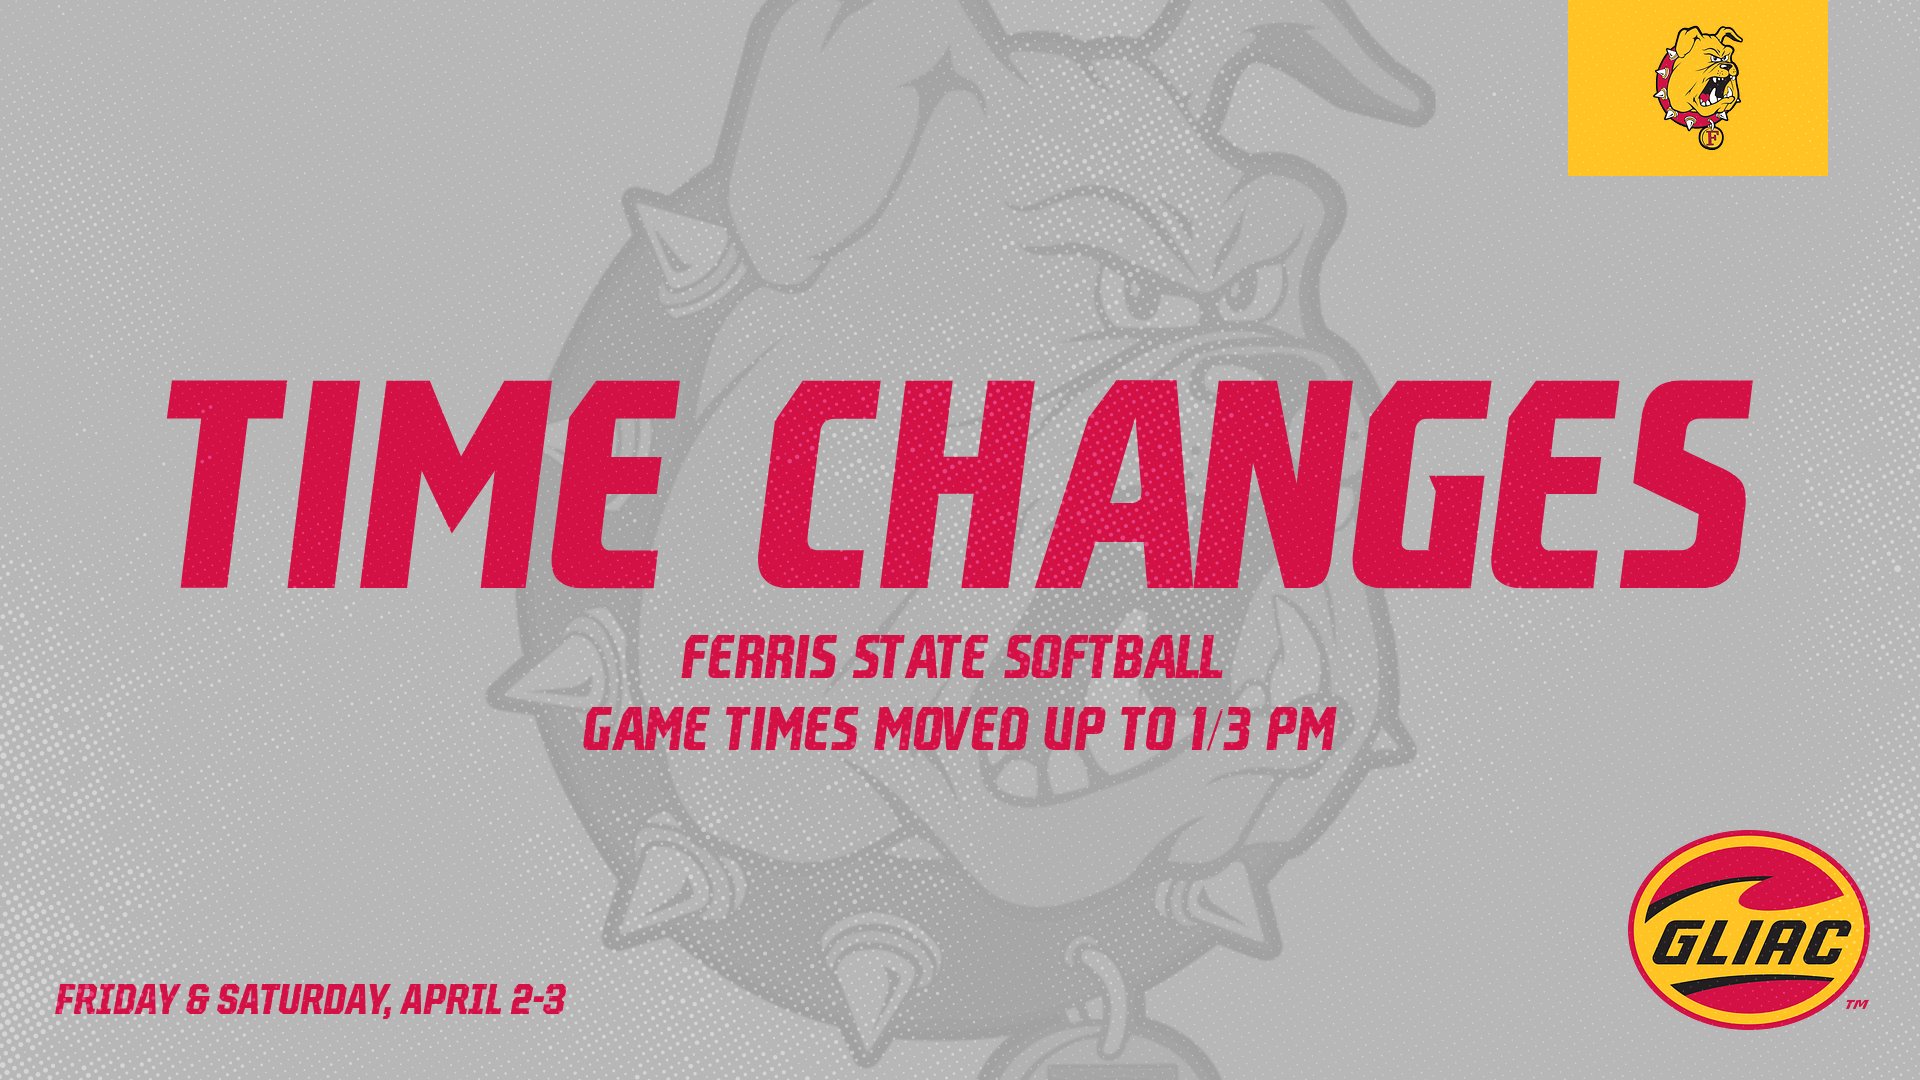 Ferris State Softball Game Times This Weekend Pushed Up One Hour